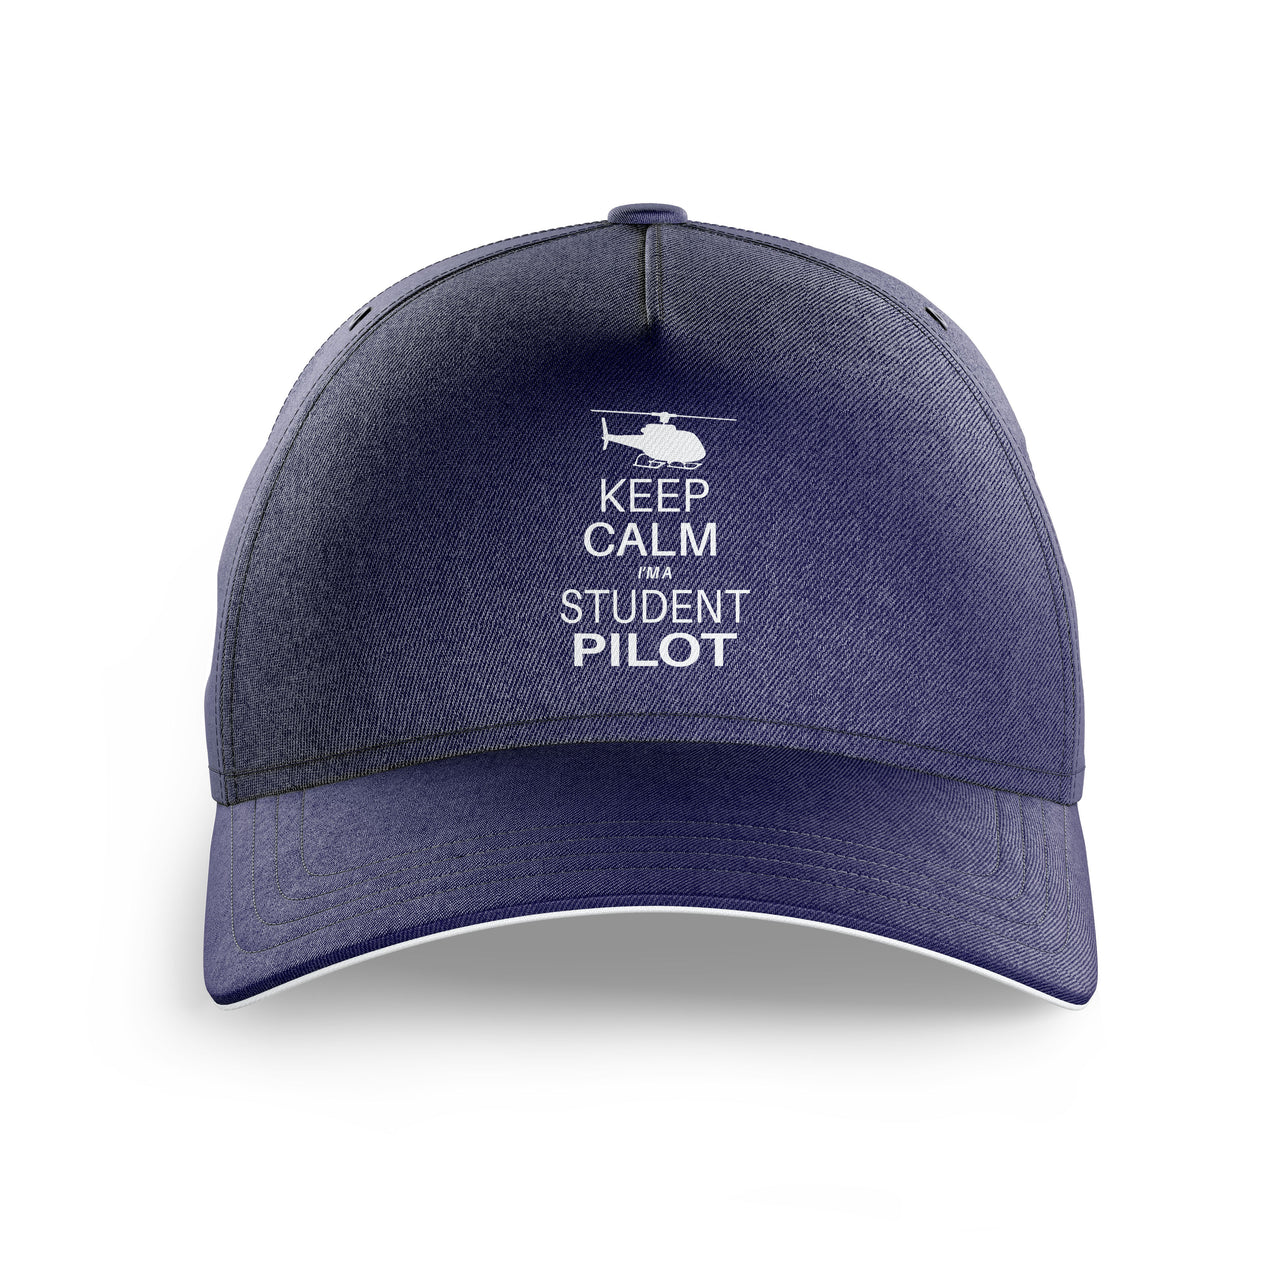 Student Pilot (Helicopter) Printed Hats